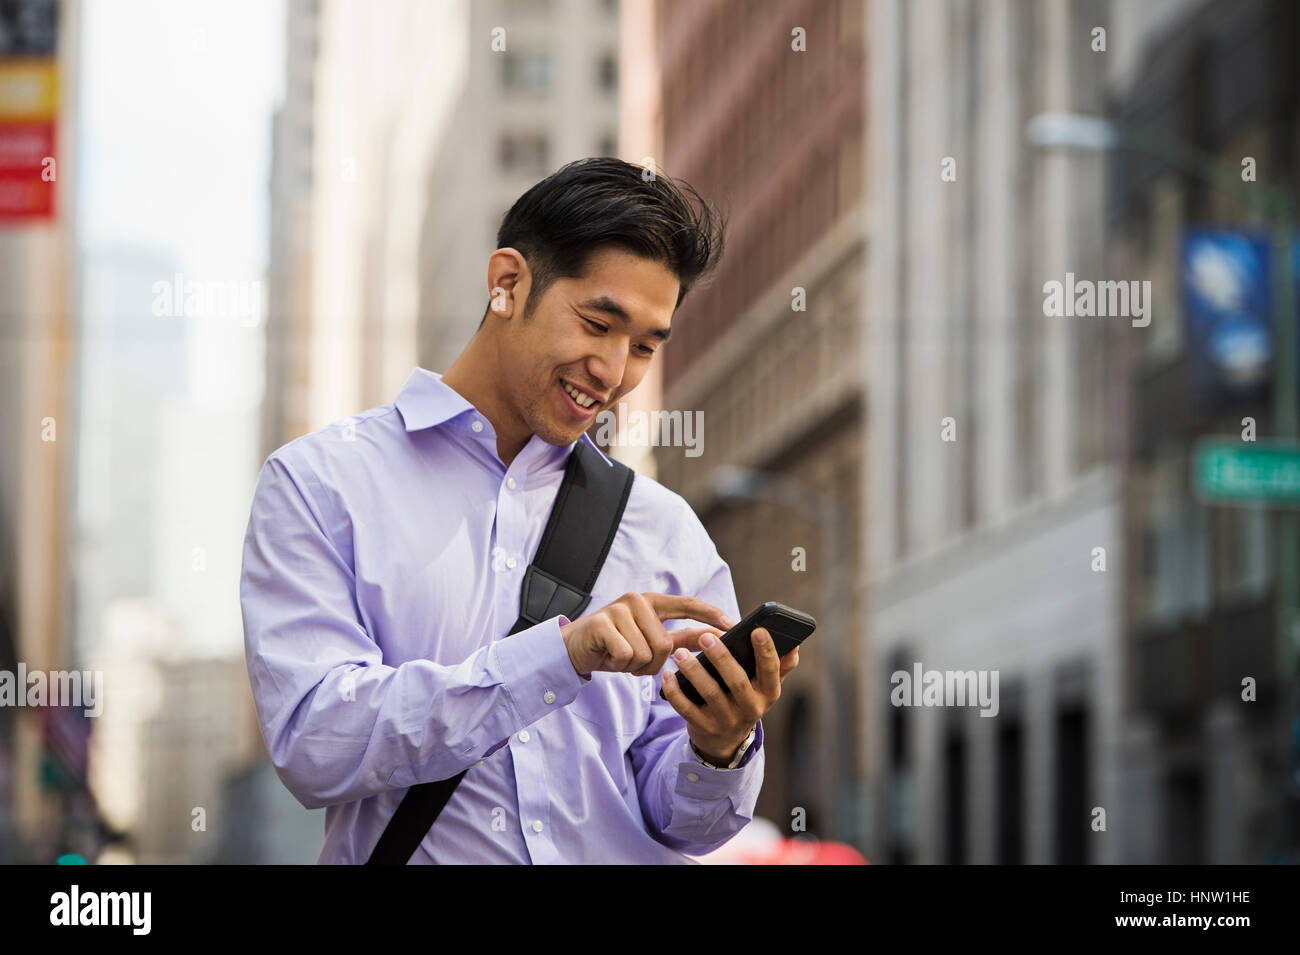 Chinese businessman texting on cell phone in city Banque D'Images